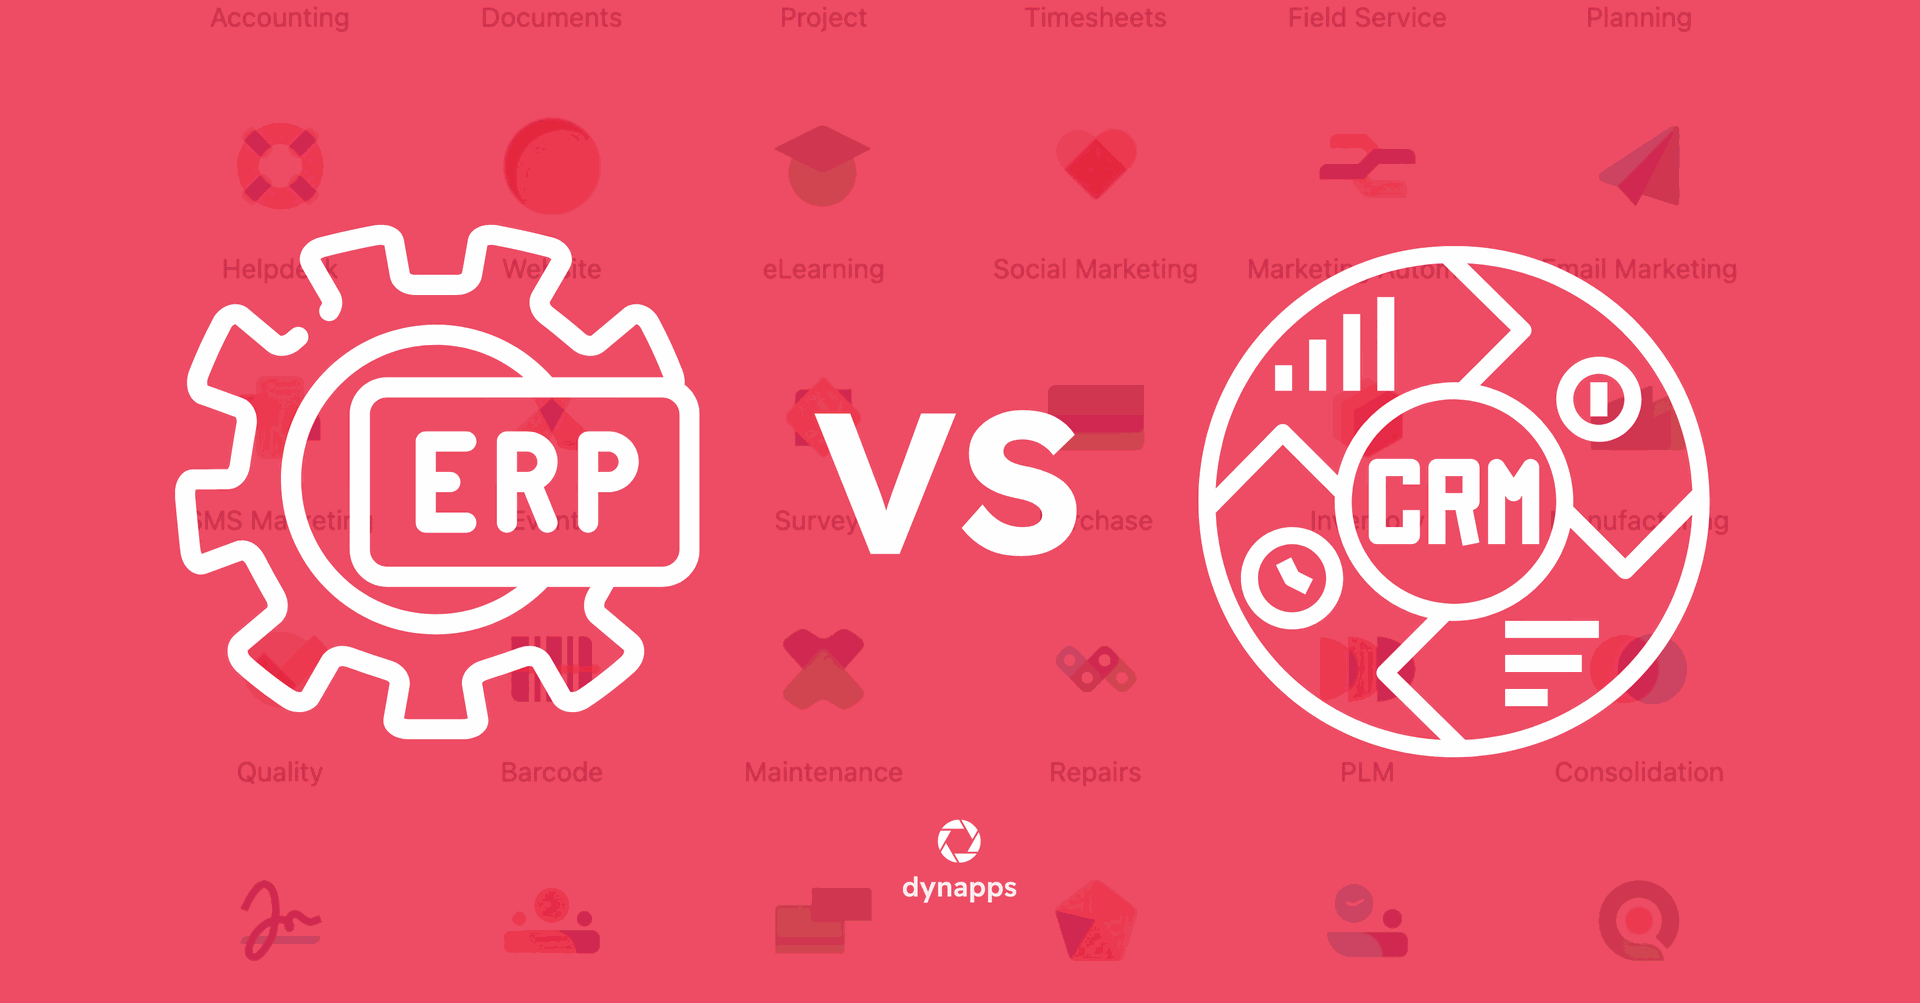 ERP vs CRM: What is the difference?